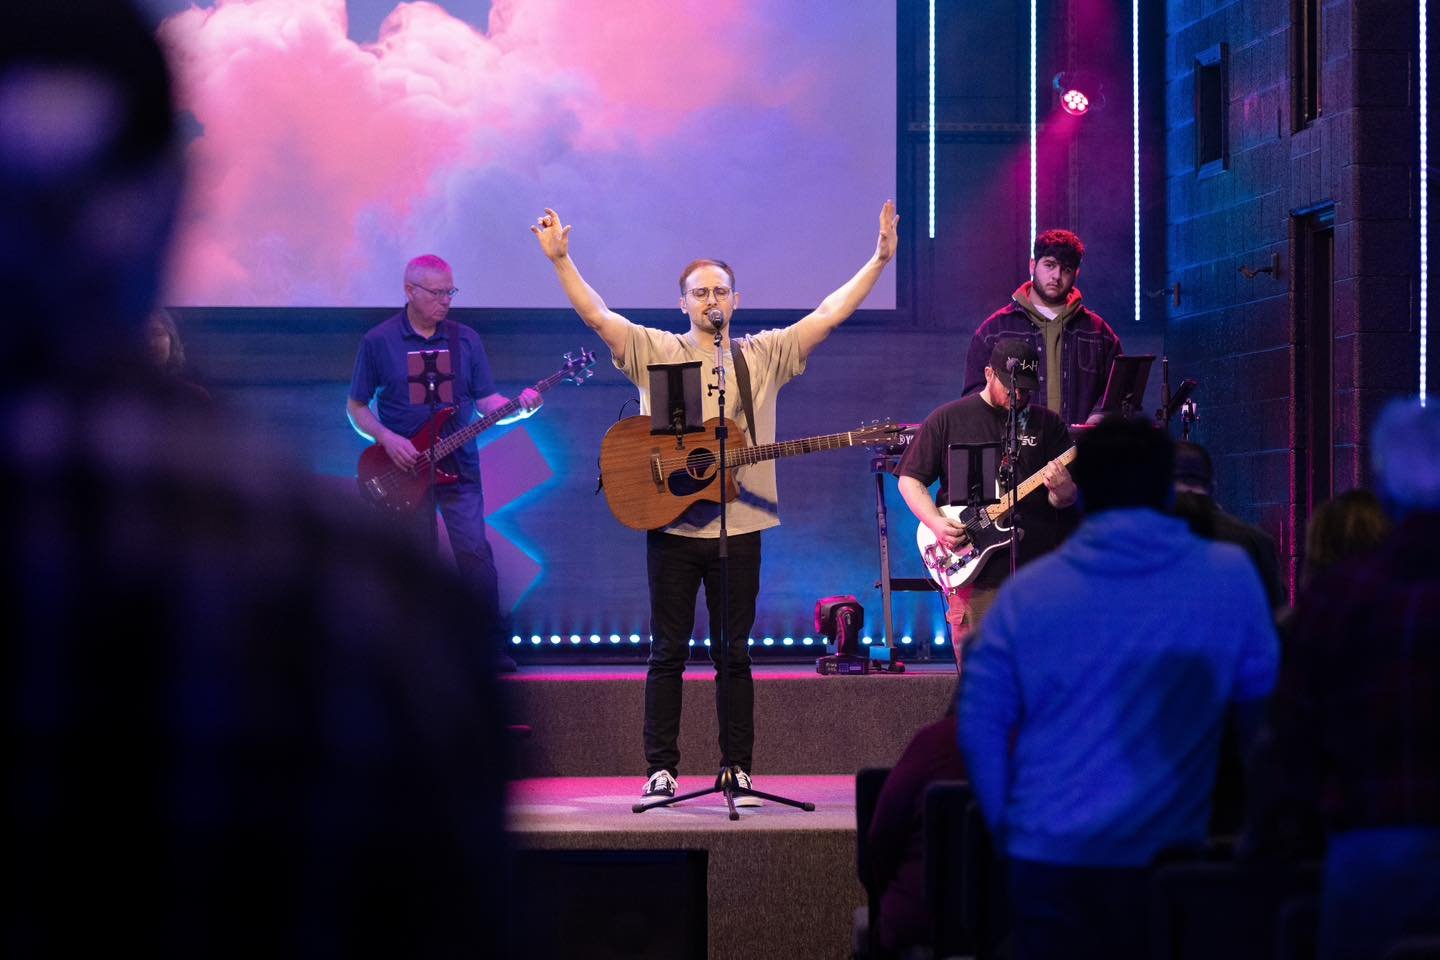 1st service is just an hour away!  We'll see you at 9:00 am or 10:45 am for church!!
Listen for free on Spotify to Sunday's setlist: https://open.spotify.com/playlist/2yUAW9YJhTe1RB2t0ttAoW?si=49fd577783c6494d
#beradiant #radiantcoast #ludington